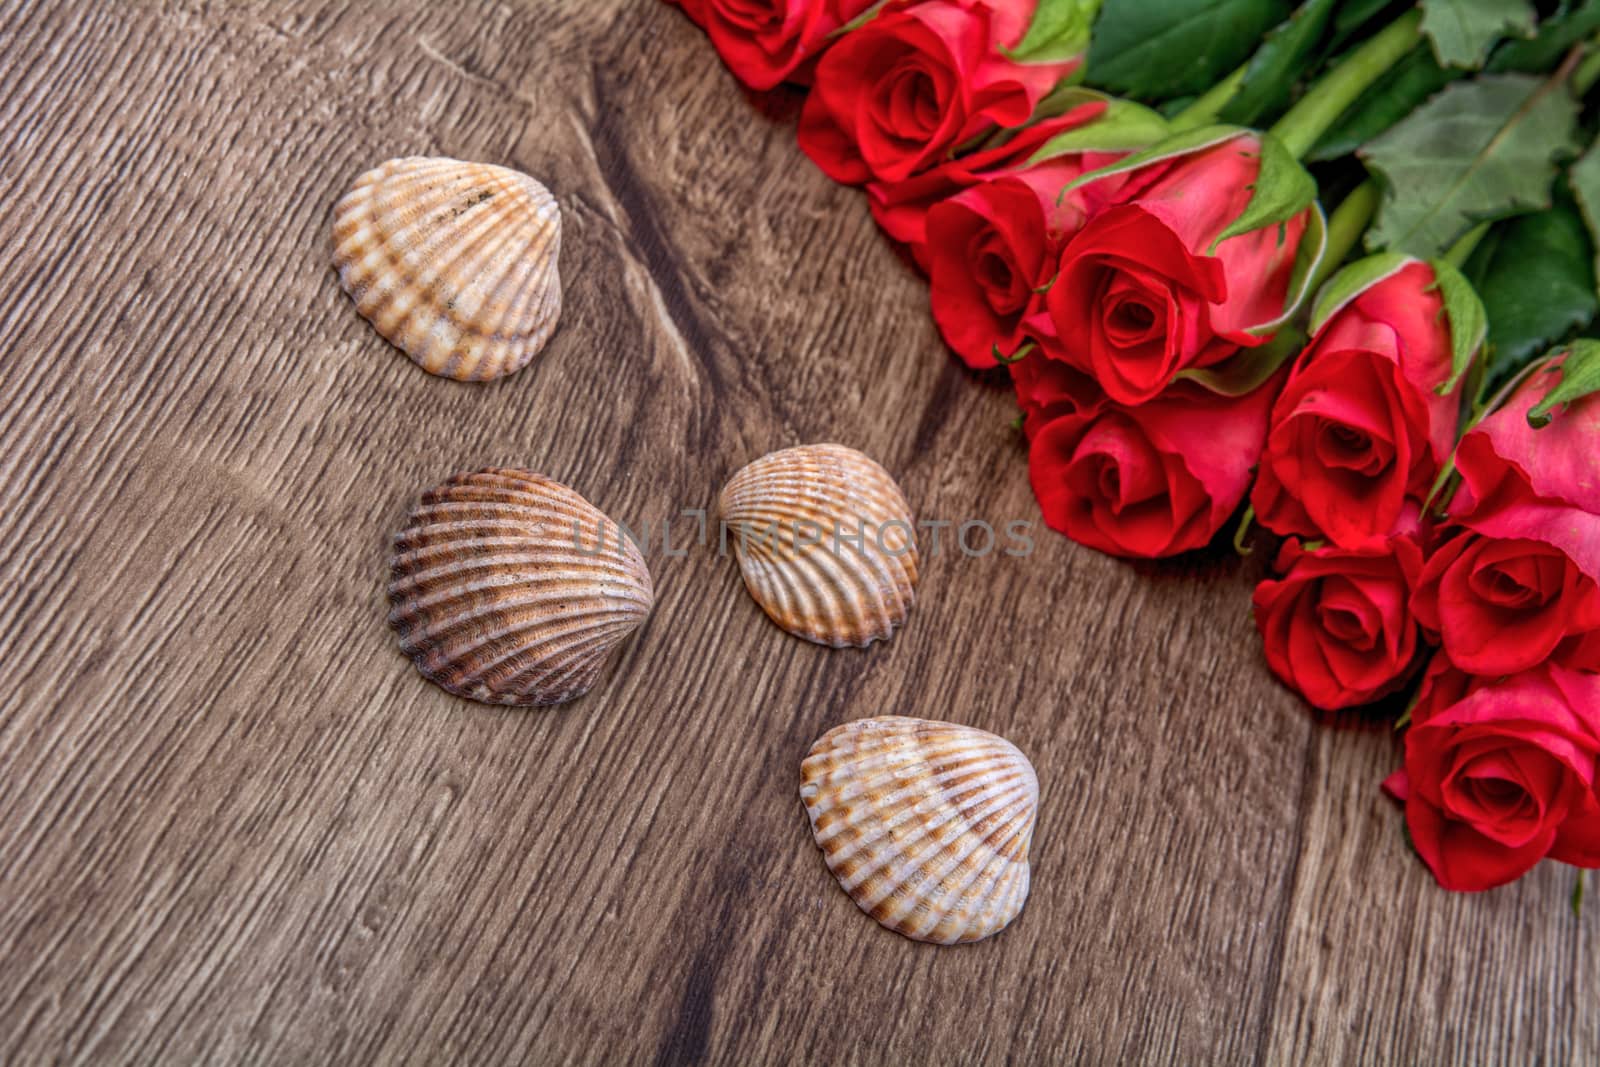 Brown shells and red roses on wooden background